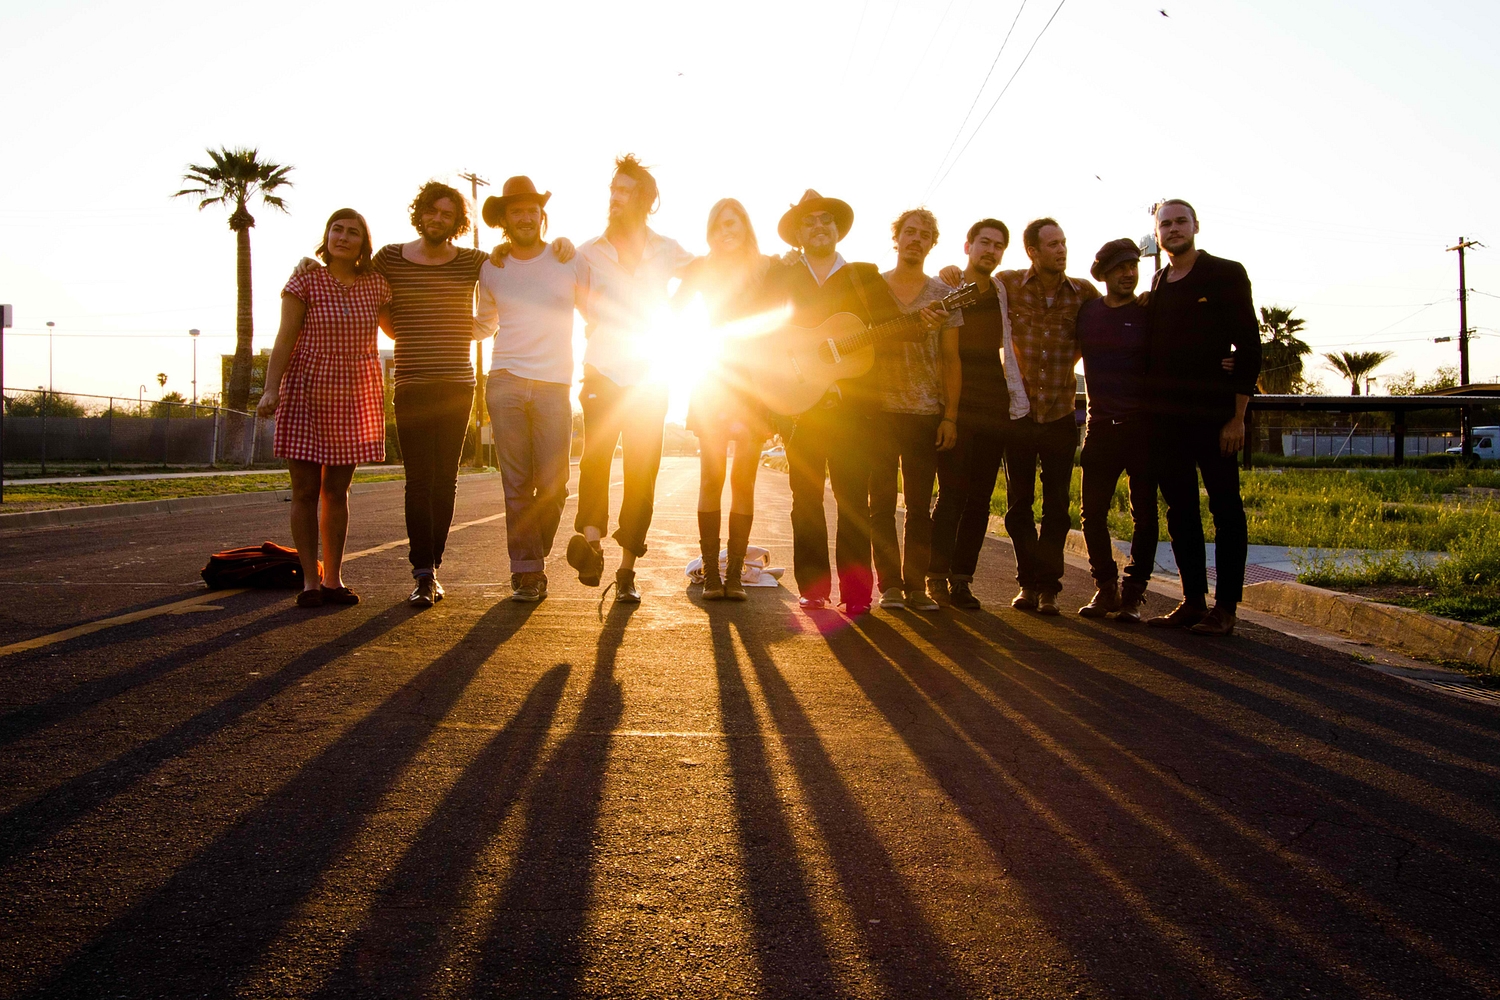 Edward Sharpe and the Magnetic Zeros part ways with vocalist Jade Castrinos